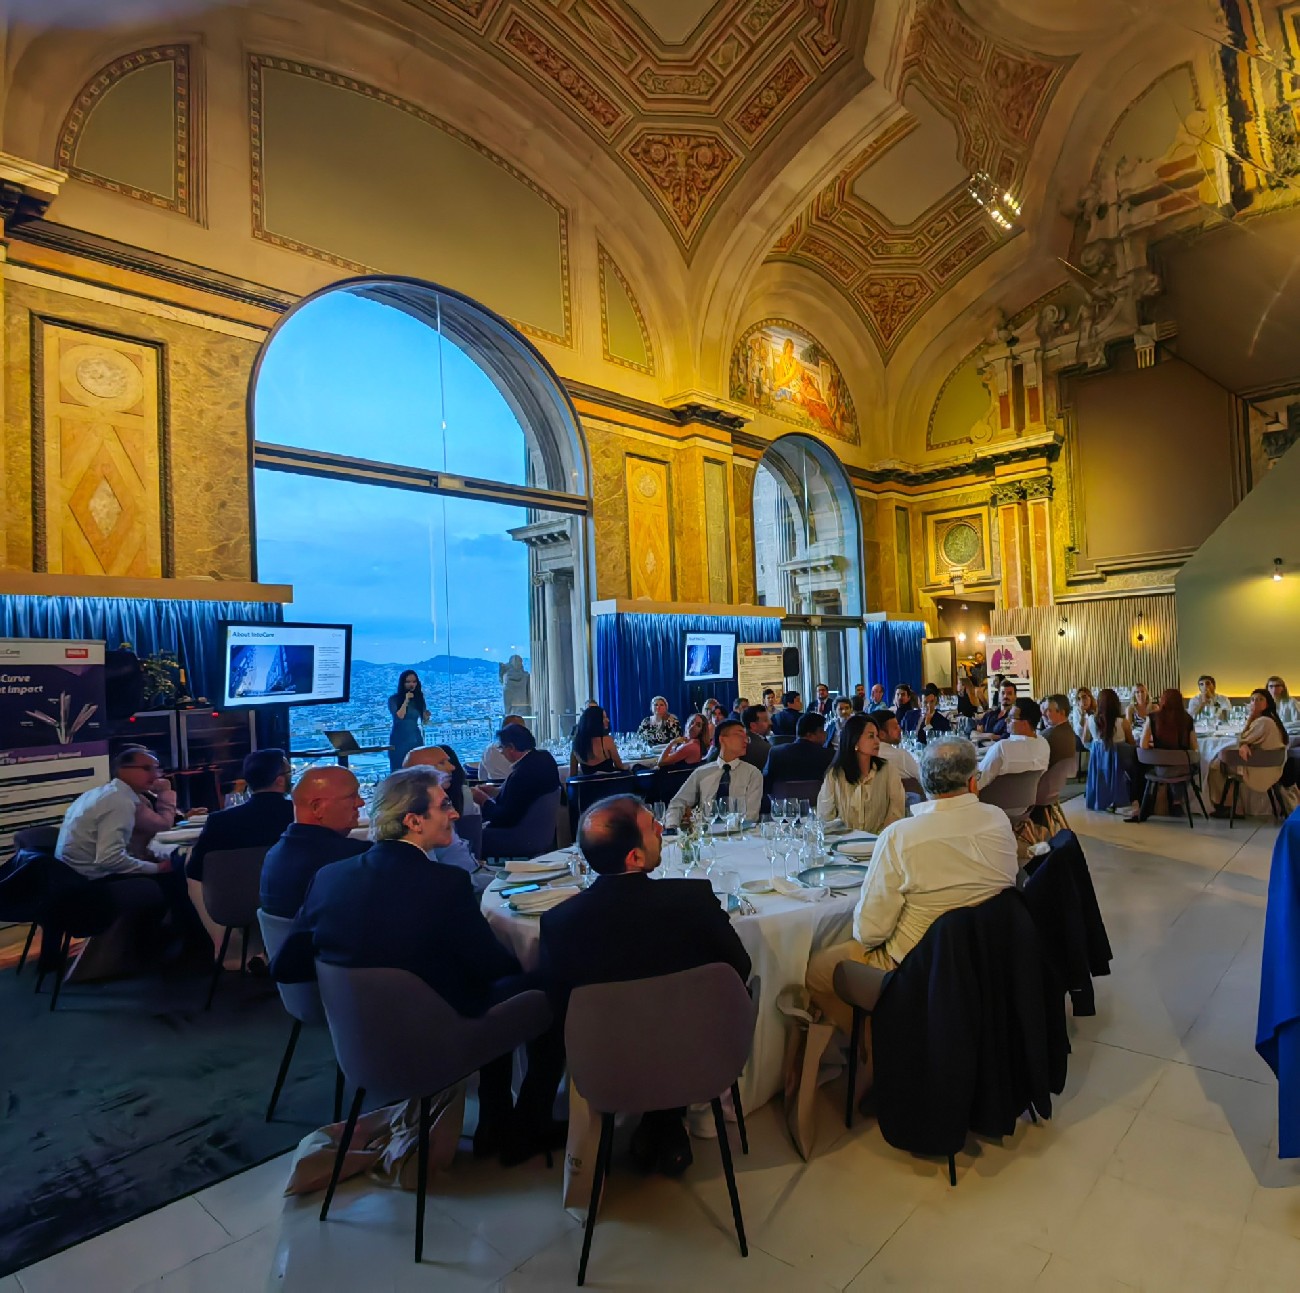 IntoCare Hosted Grand Scientific Dinner at National Art Museum of Catalonia During the 32nd ESTS Meeting in Barcelona